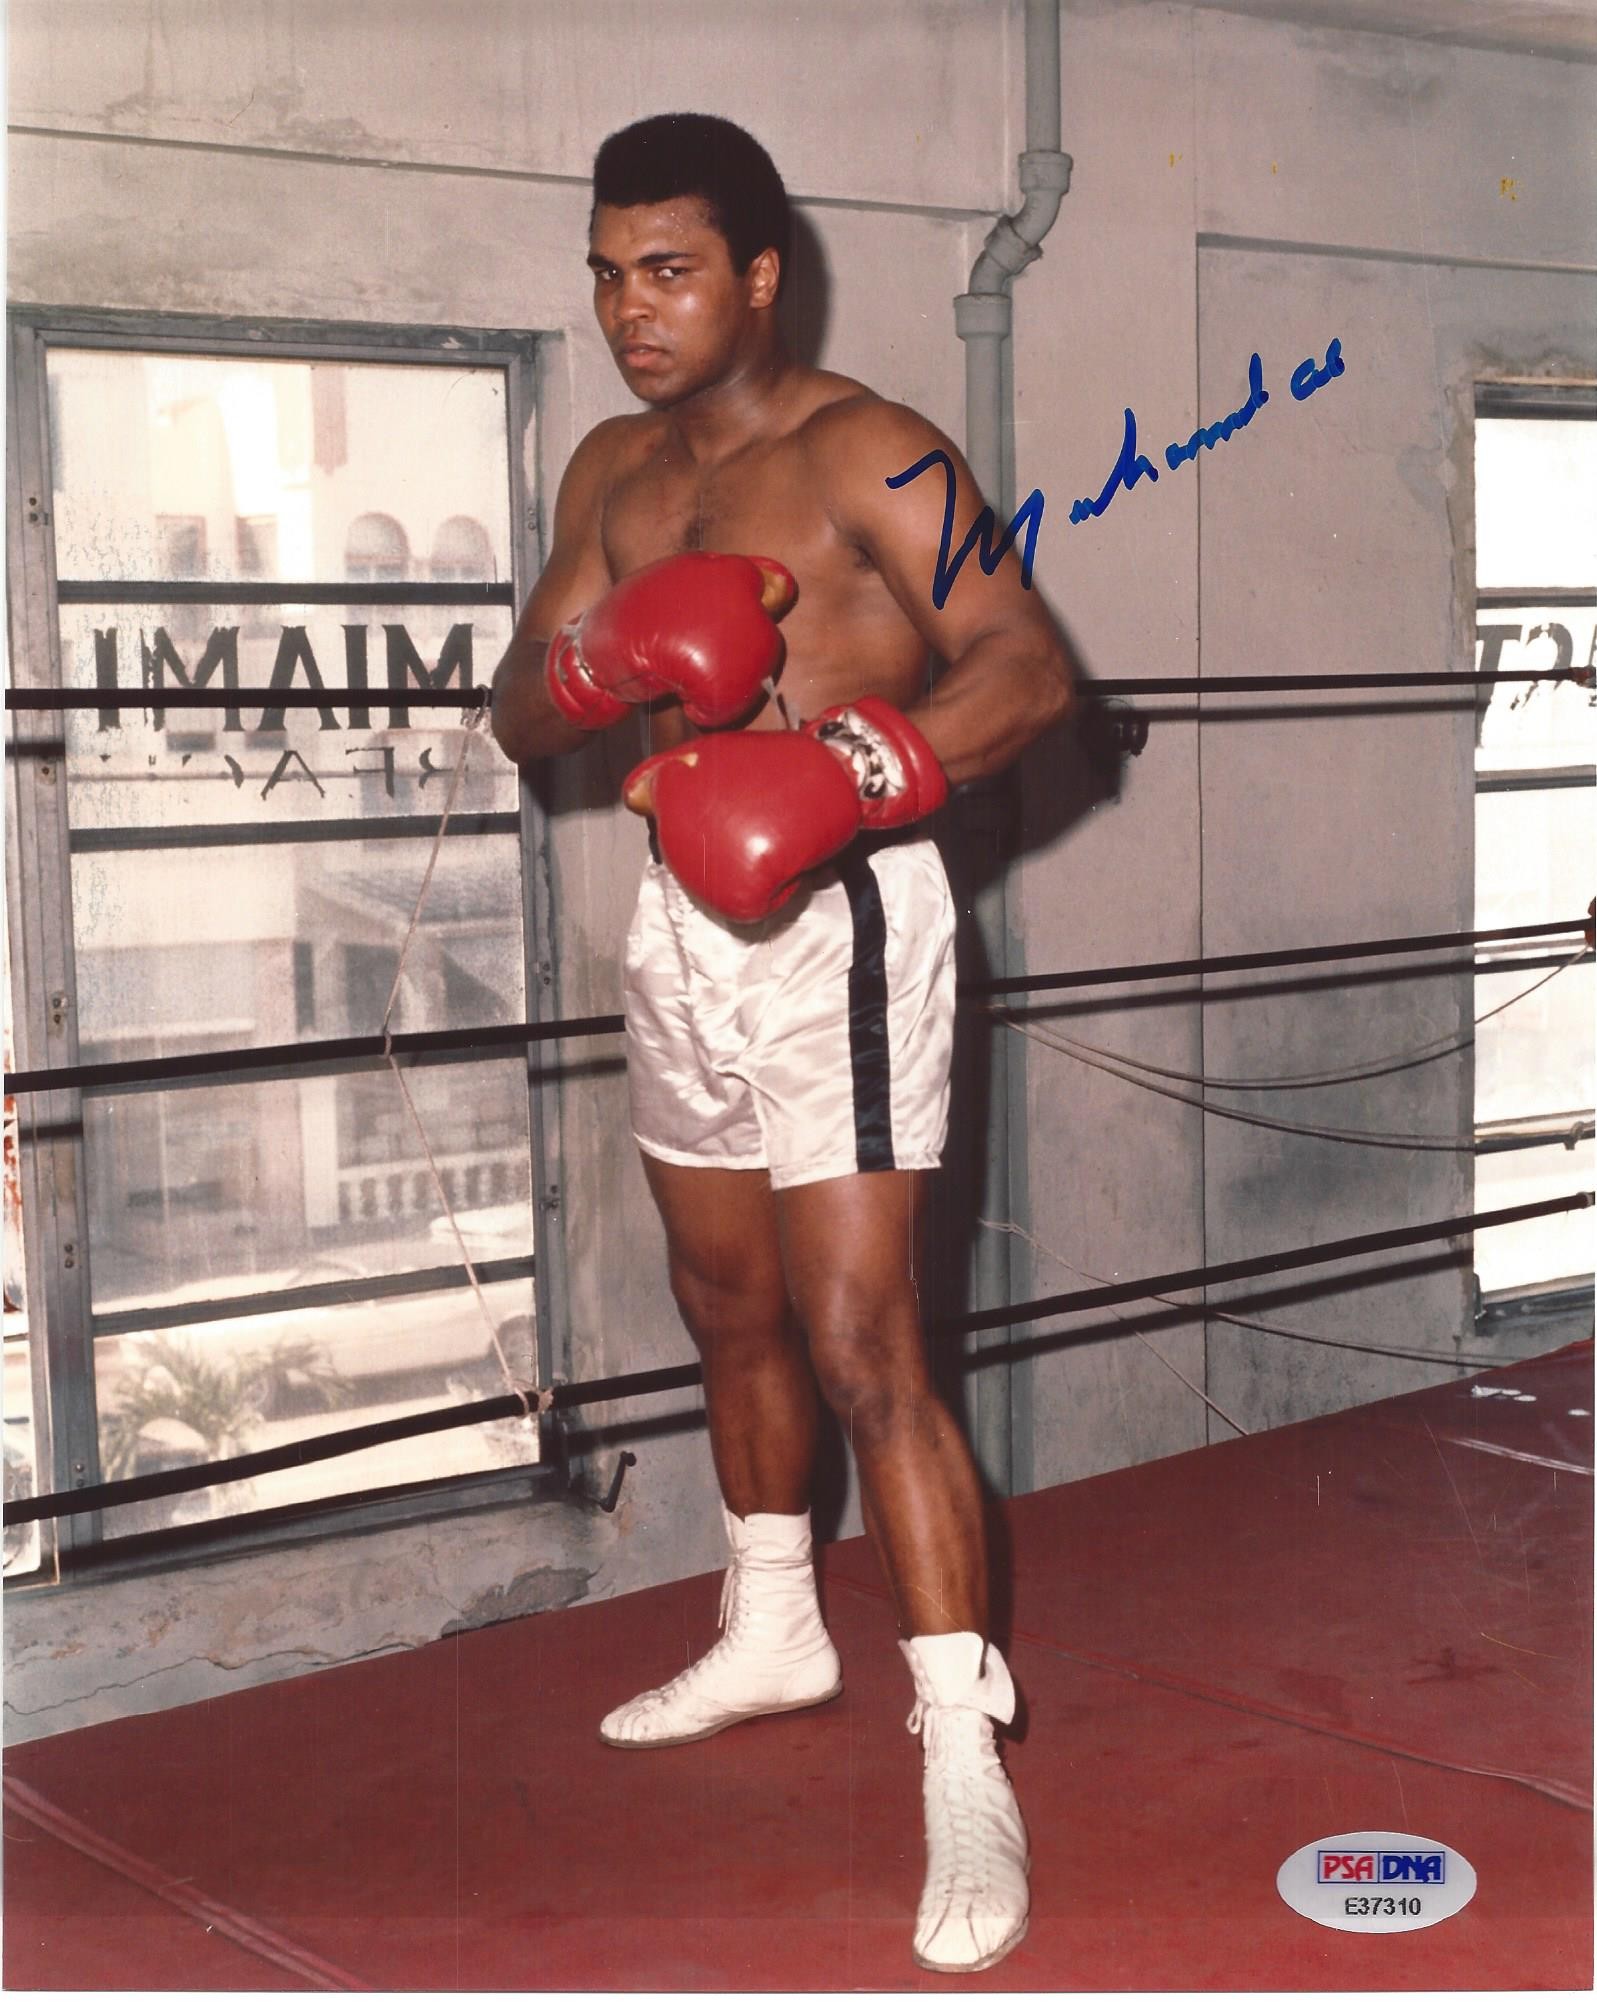 signed 8x10 of Muhammad Ali working out in the gym